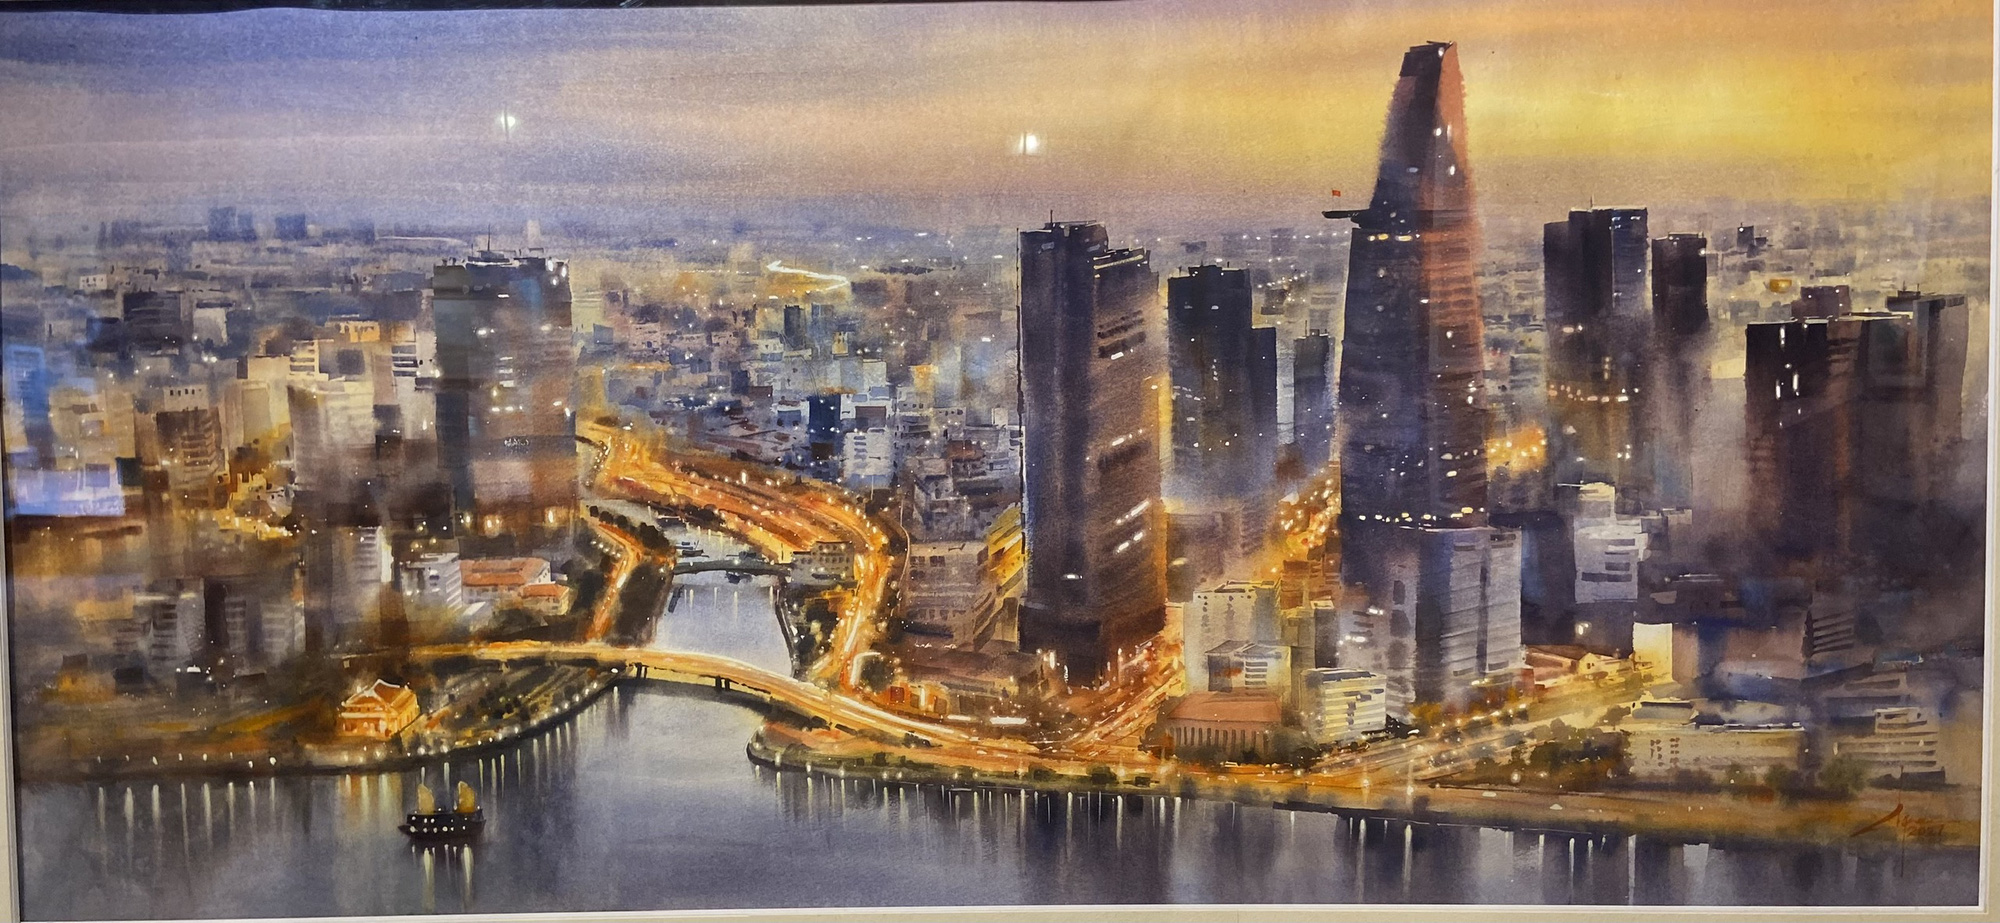 ‘Saigon by night’ by artist Doan Quoc is on display at a watercolor exhibition in Hanoi in May 2023. Photo: T. Dieu / Tuoi Tre